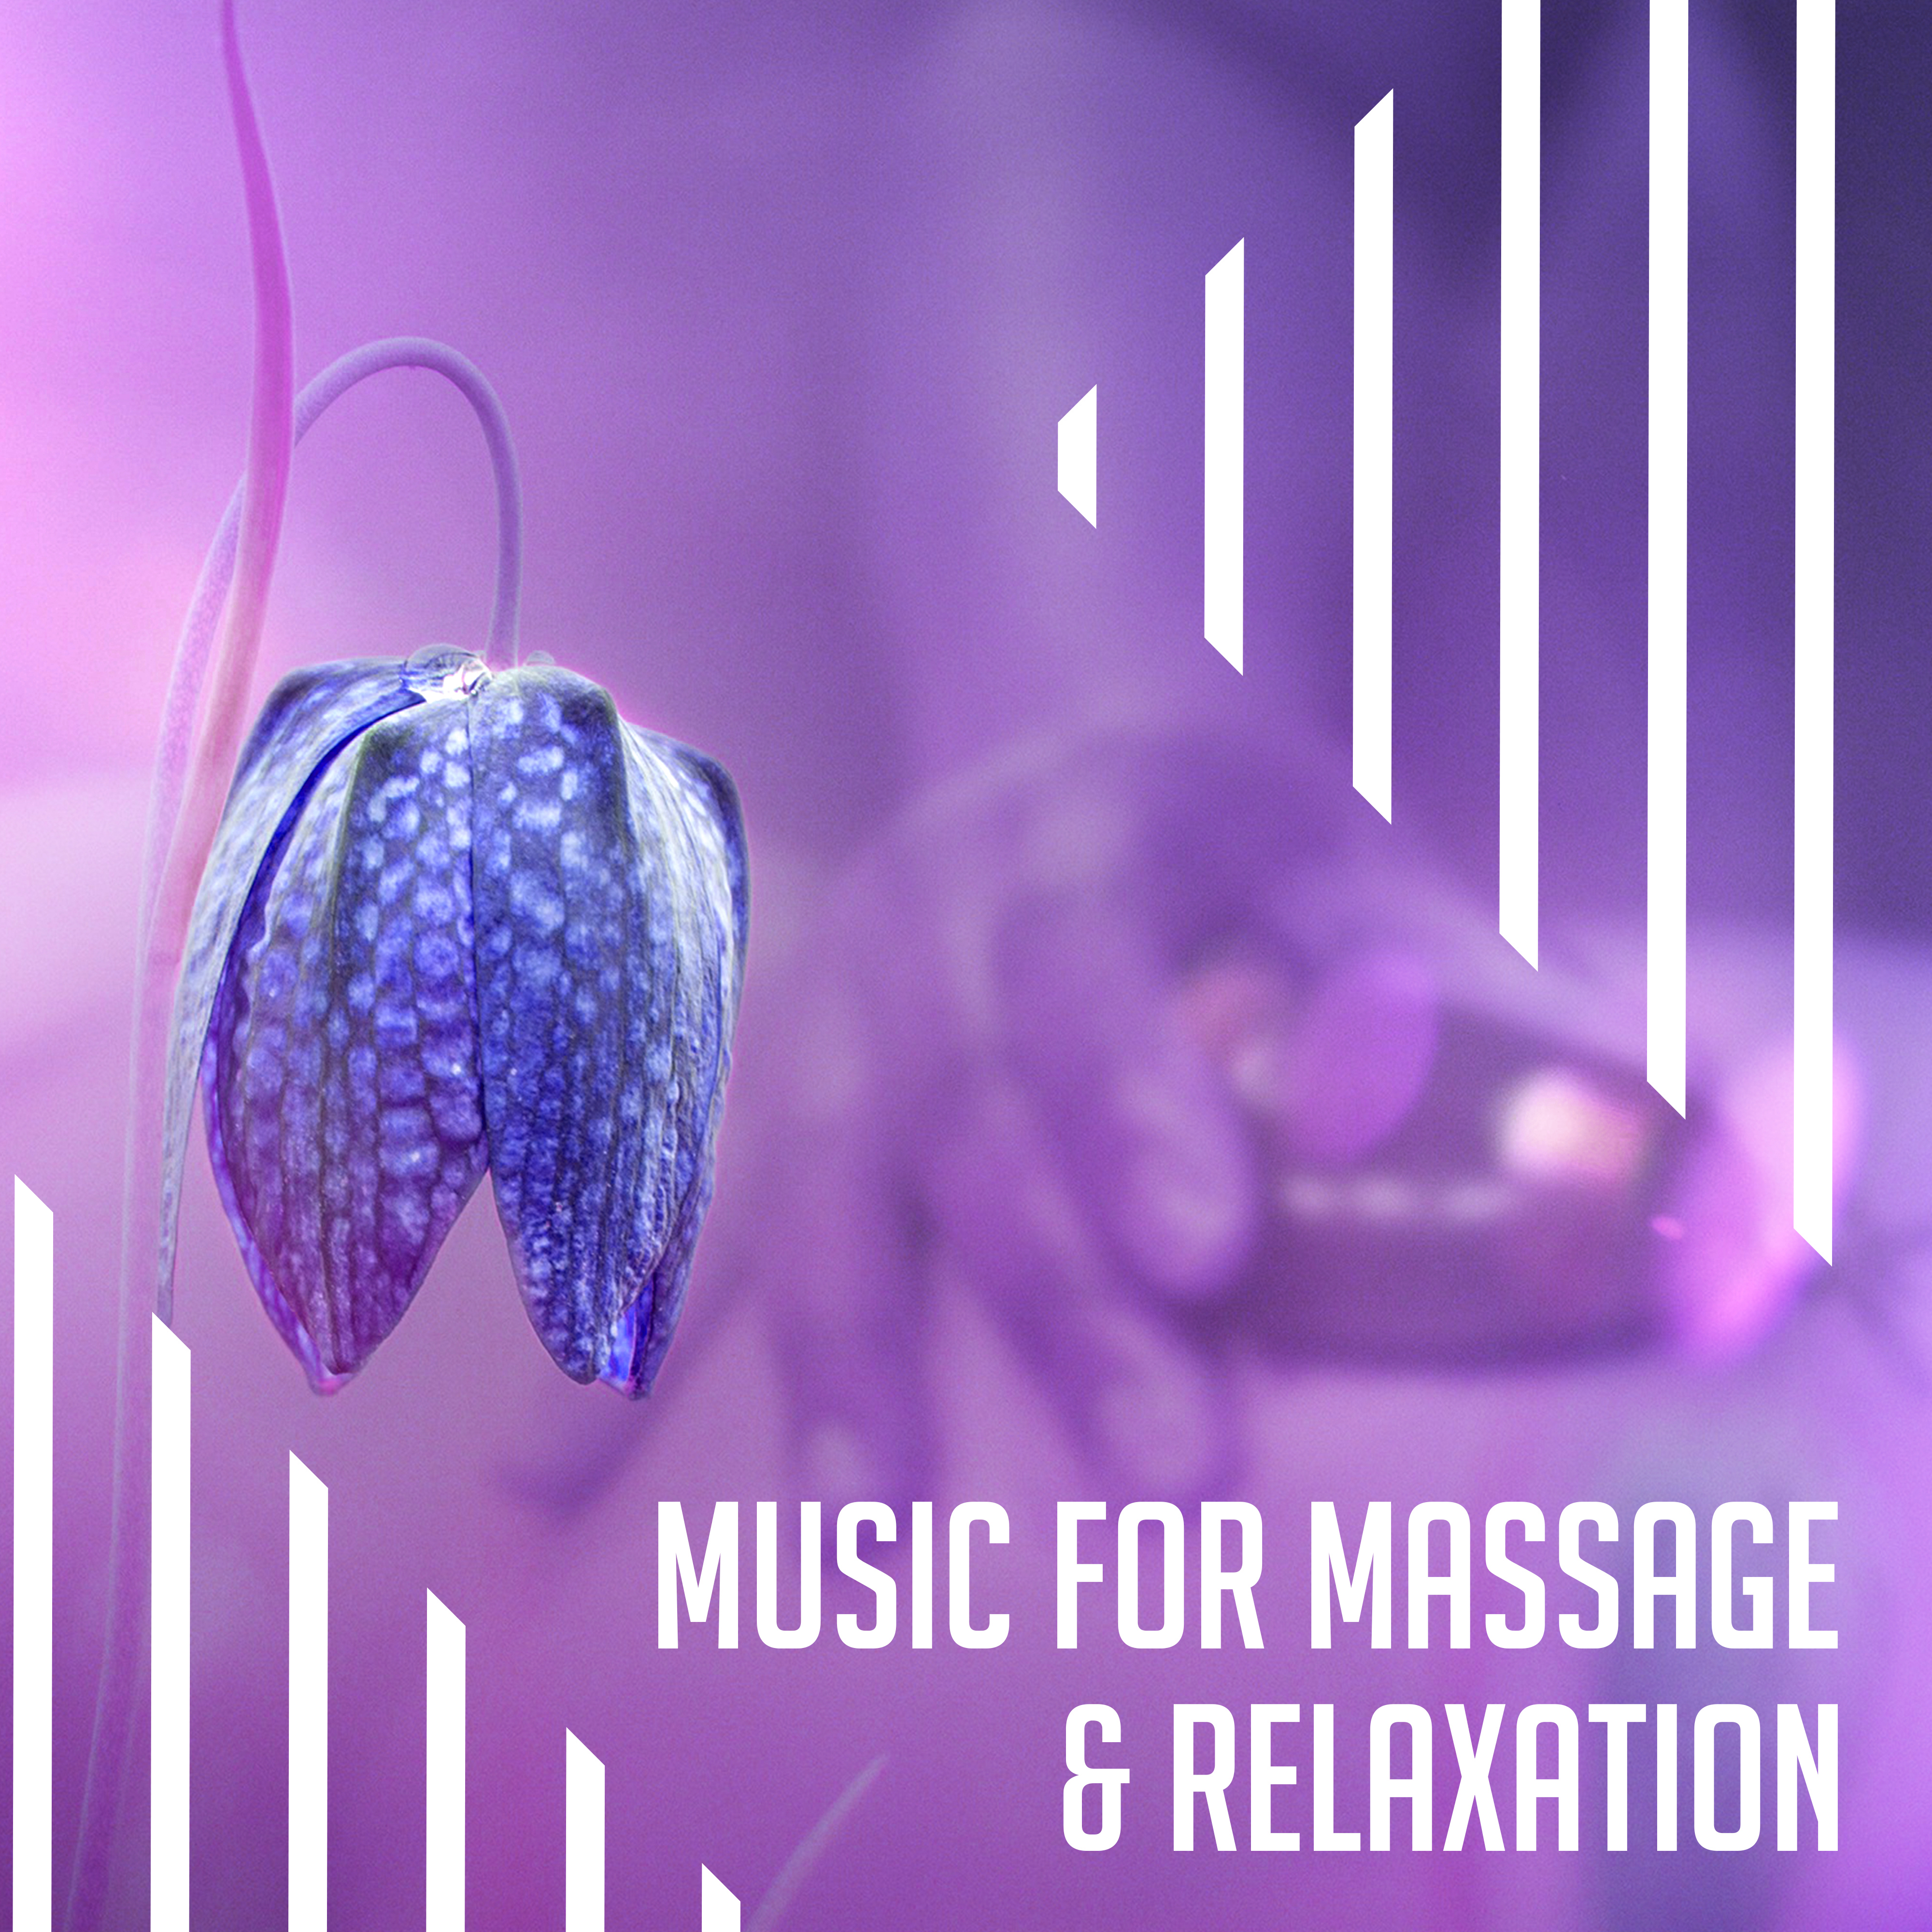 Music for Massage  Relaxation  Spa Dreams, Pure Mind, Healing Sounds, Bliss Spa, Wellness, Zen, Deep Relief, Calm Down, Music for Spa